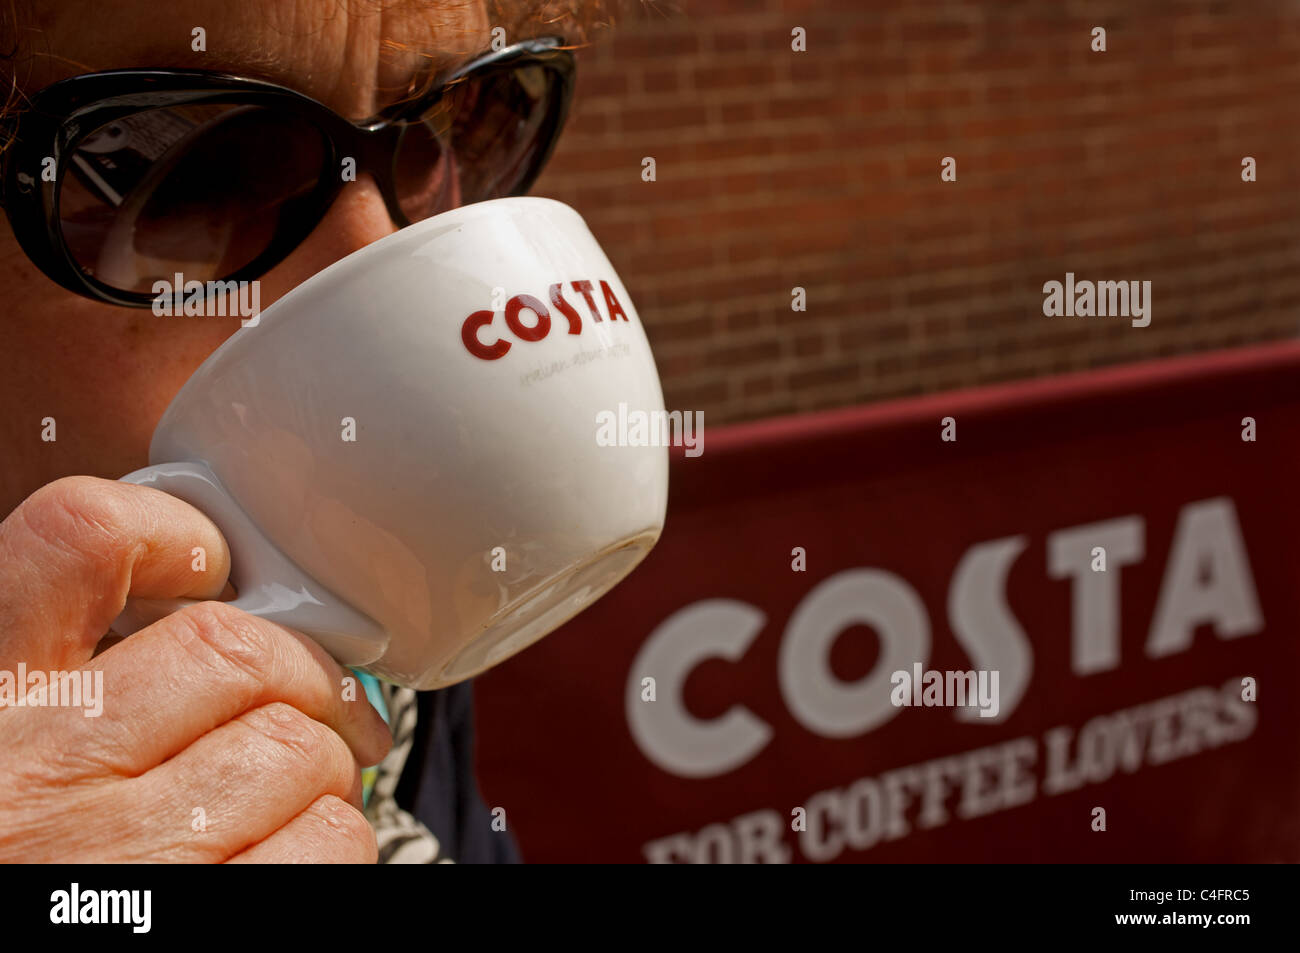 Woman drinking a cup of Costa coffee Stock Photo